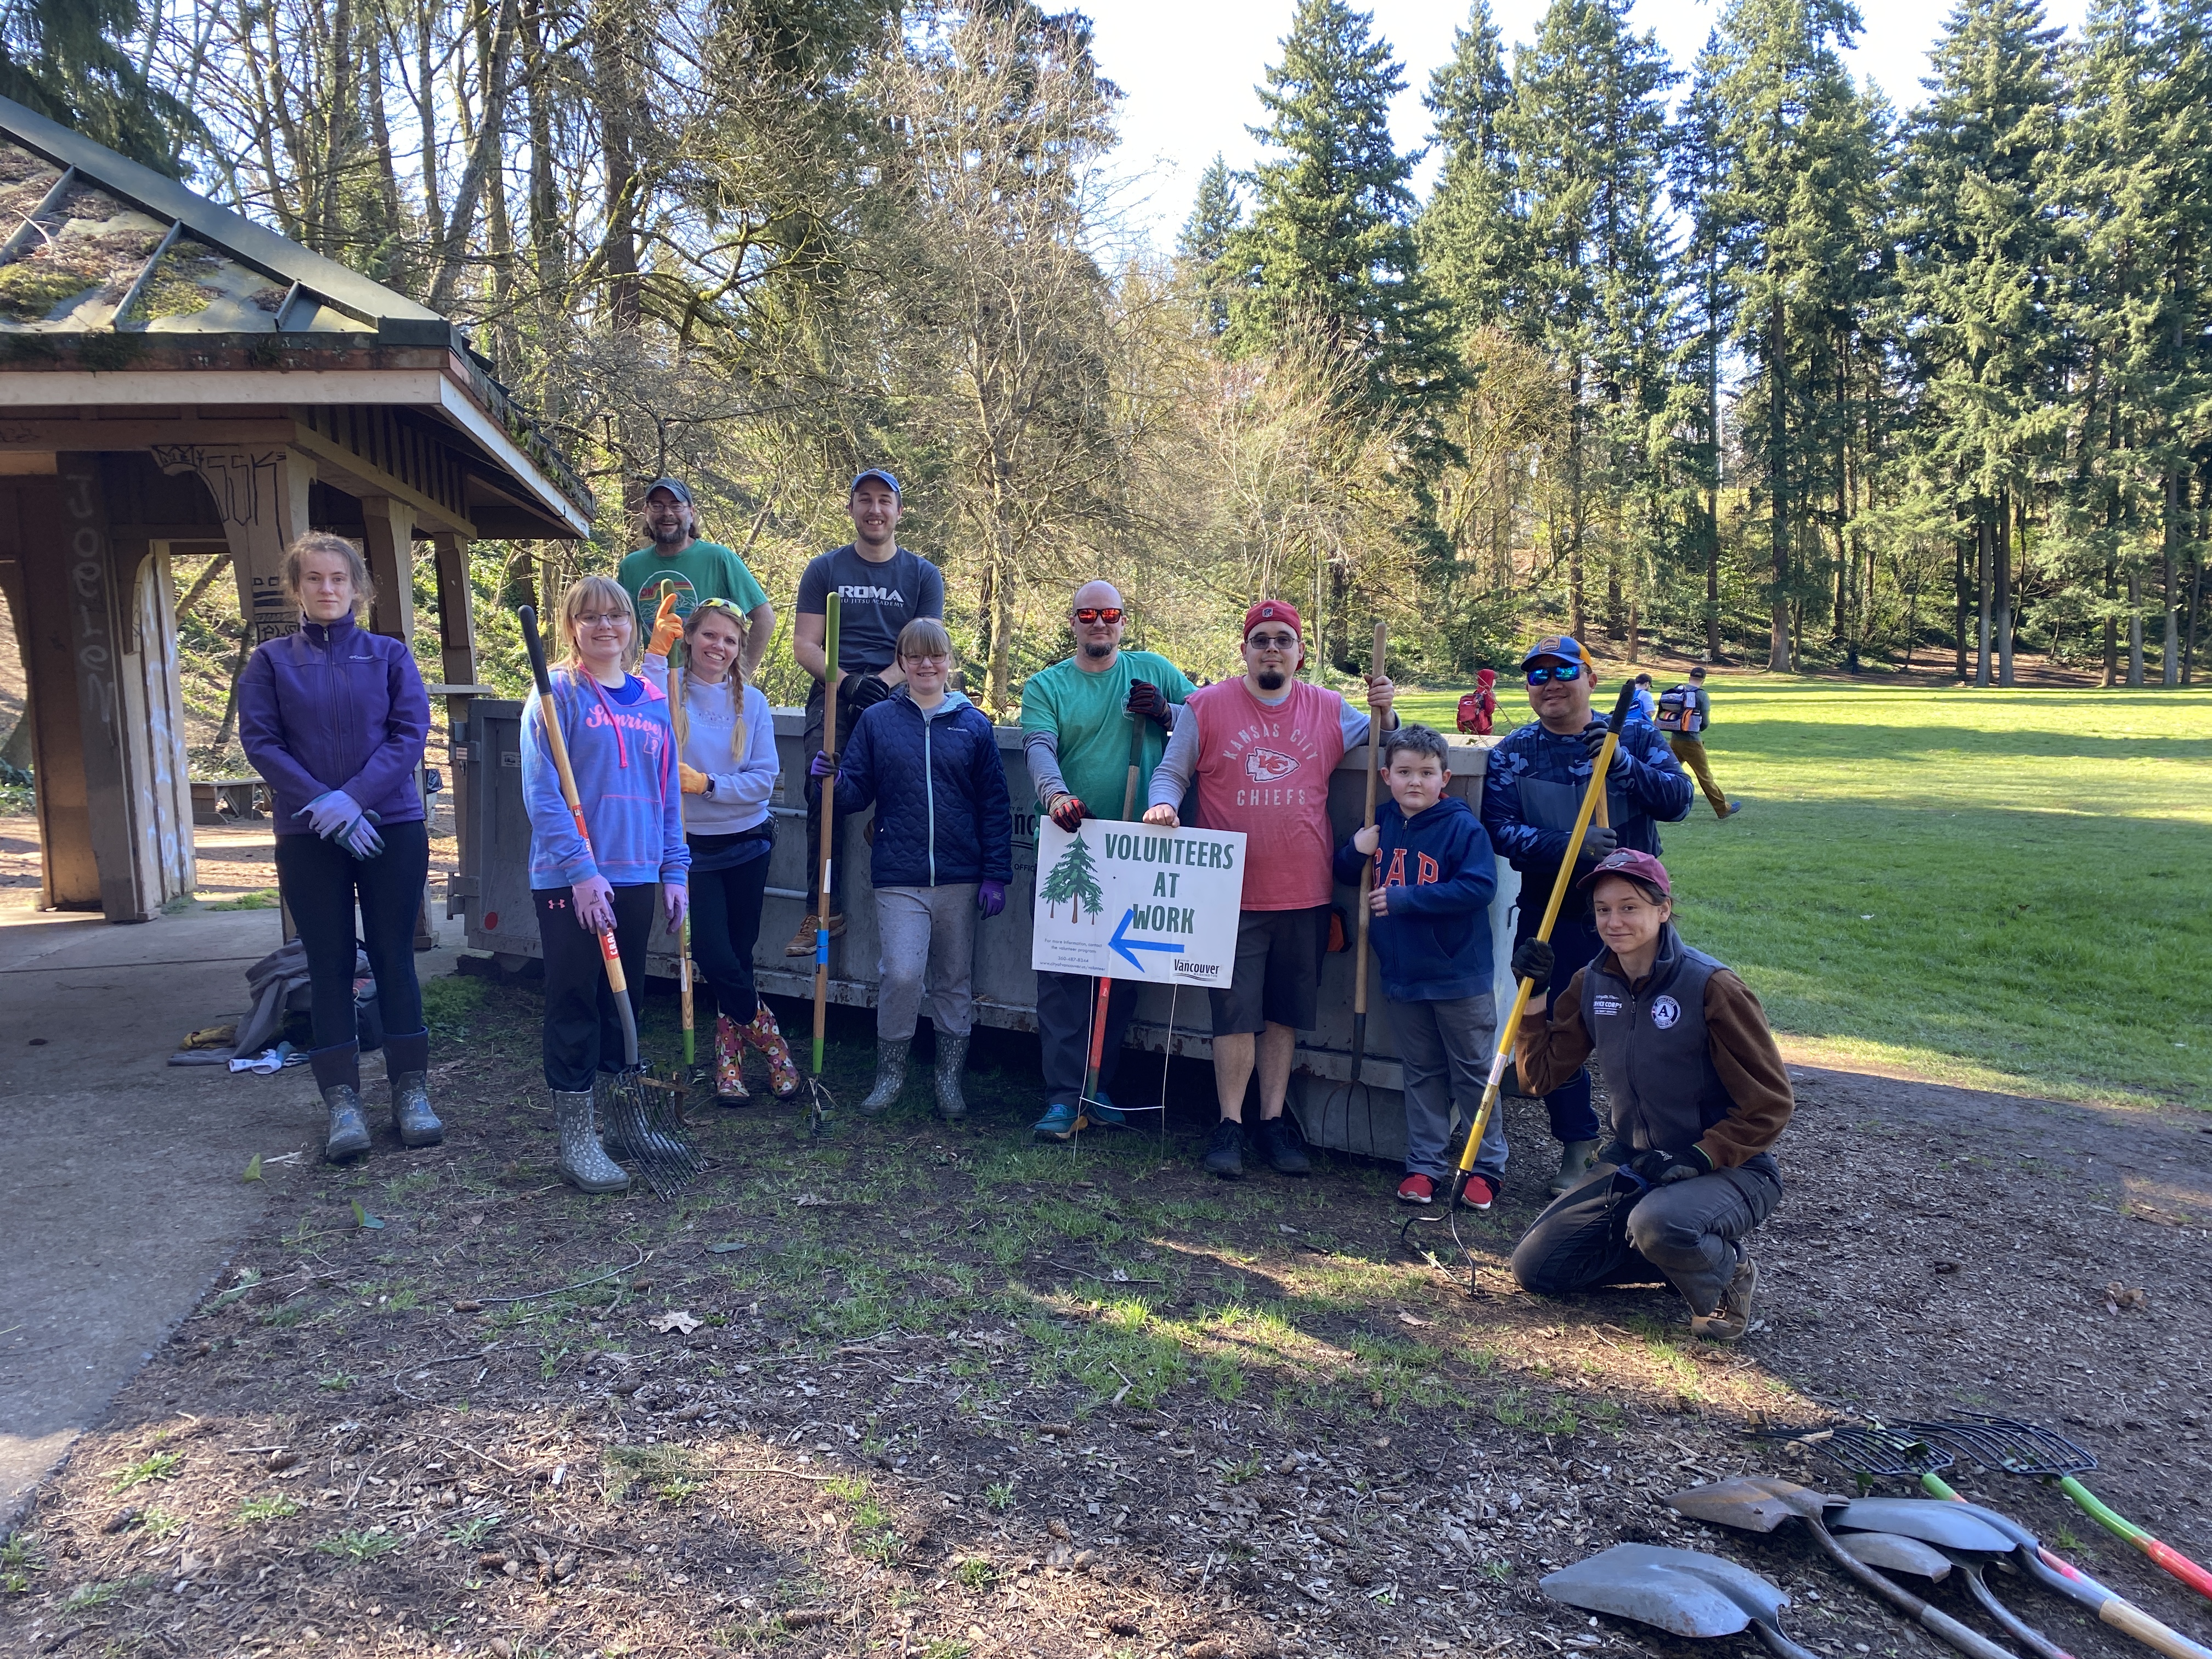 group of volunteers pose with tools outside at a park